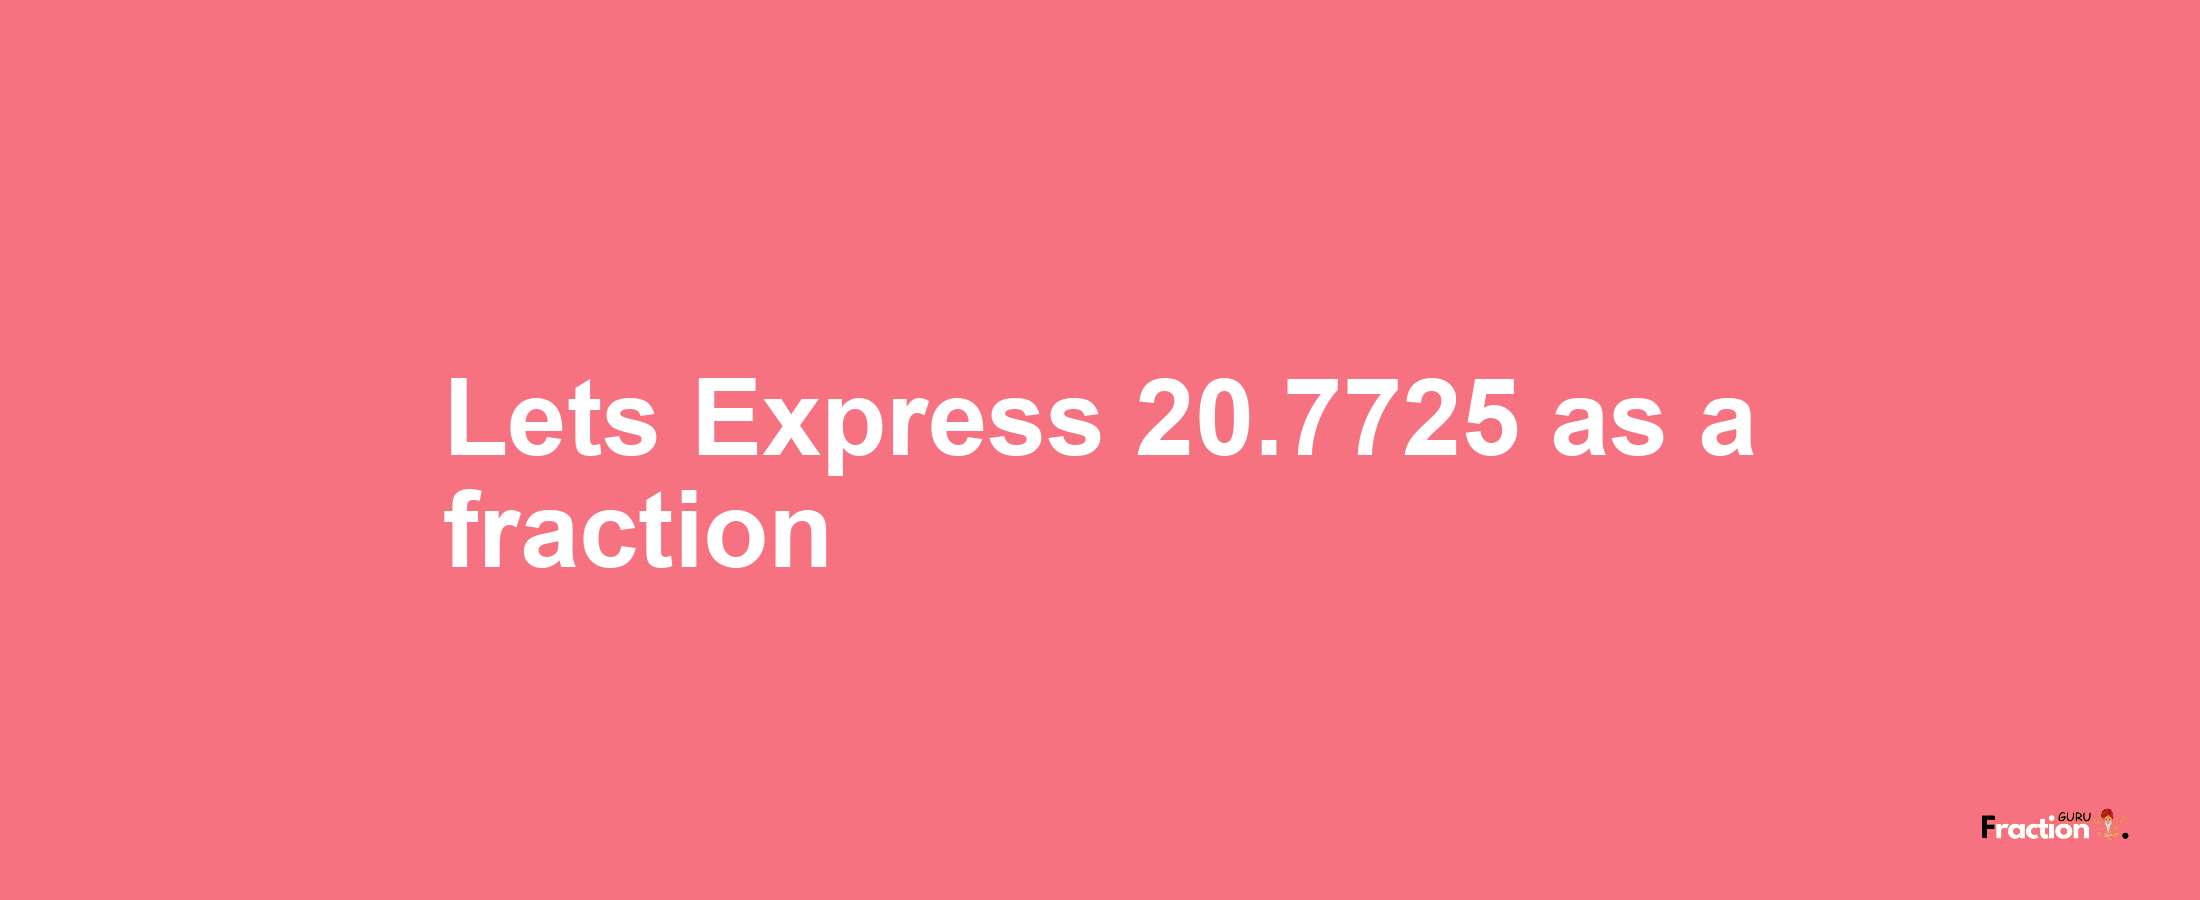 Lets Express 20.7725 as afraction